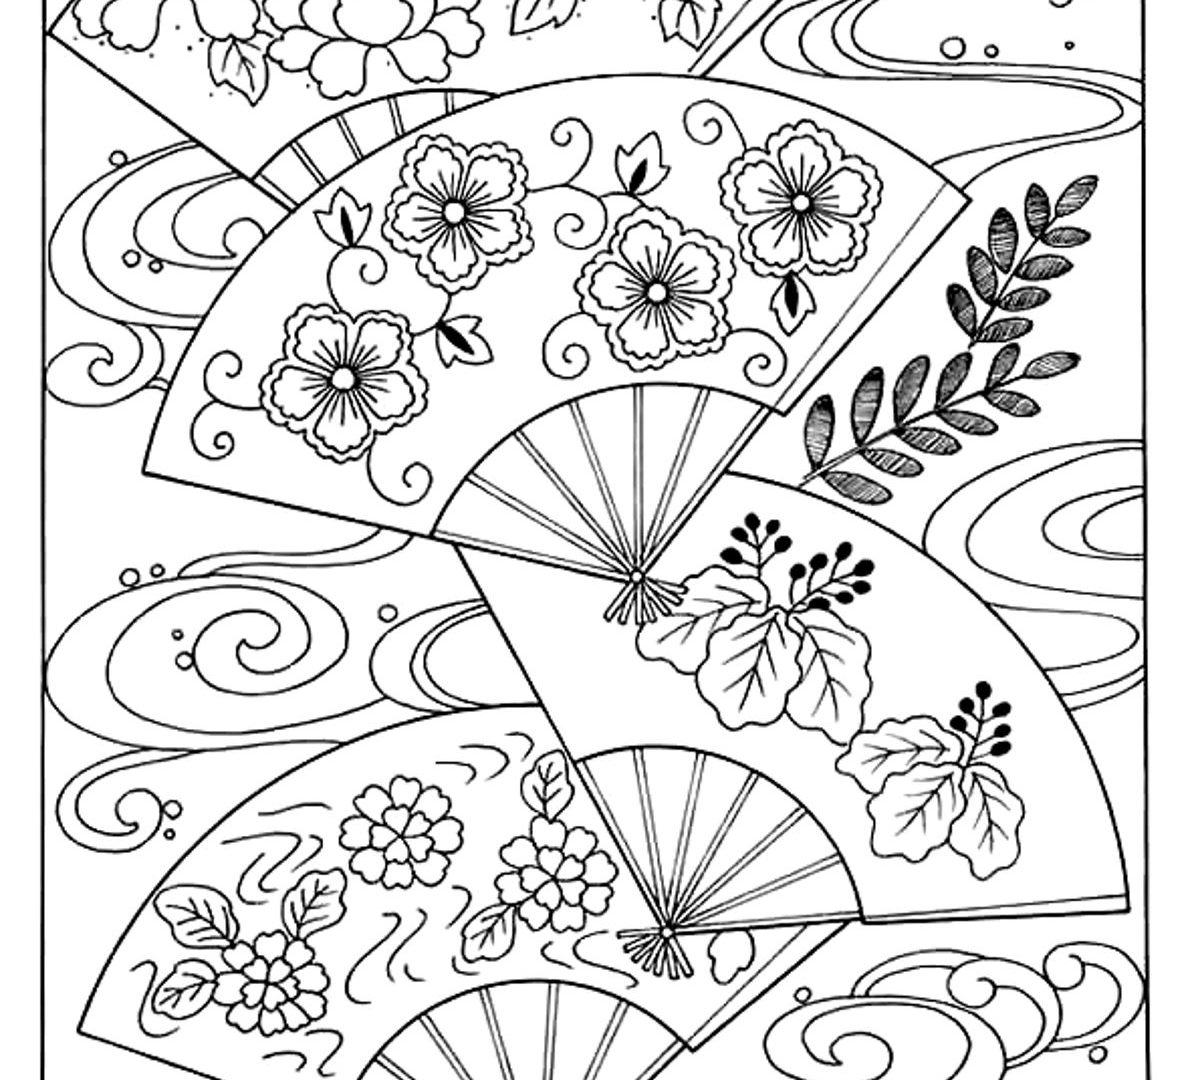 Anime Dragon Coloring Pages at GetColorings.com | Free printable